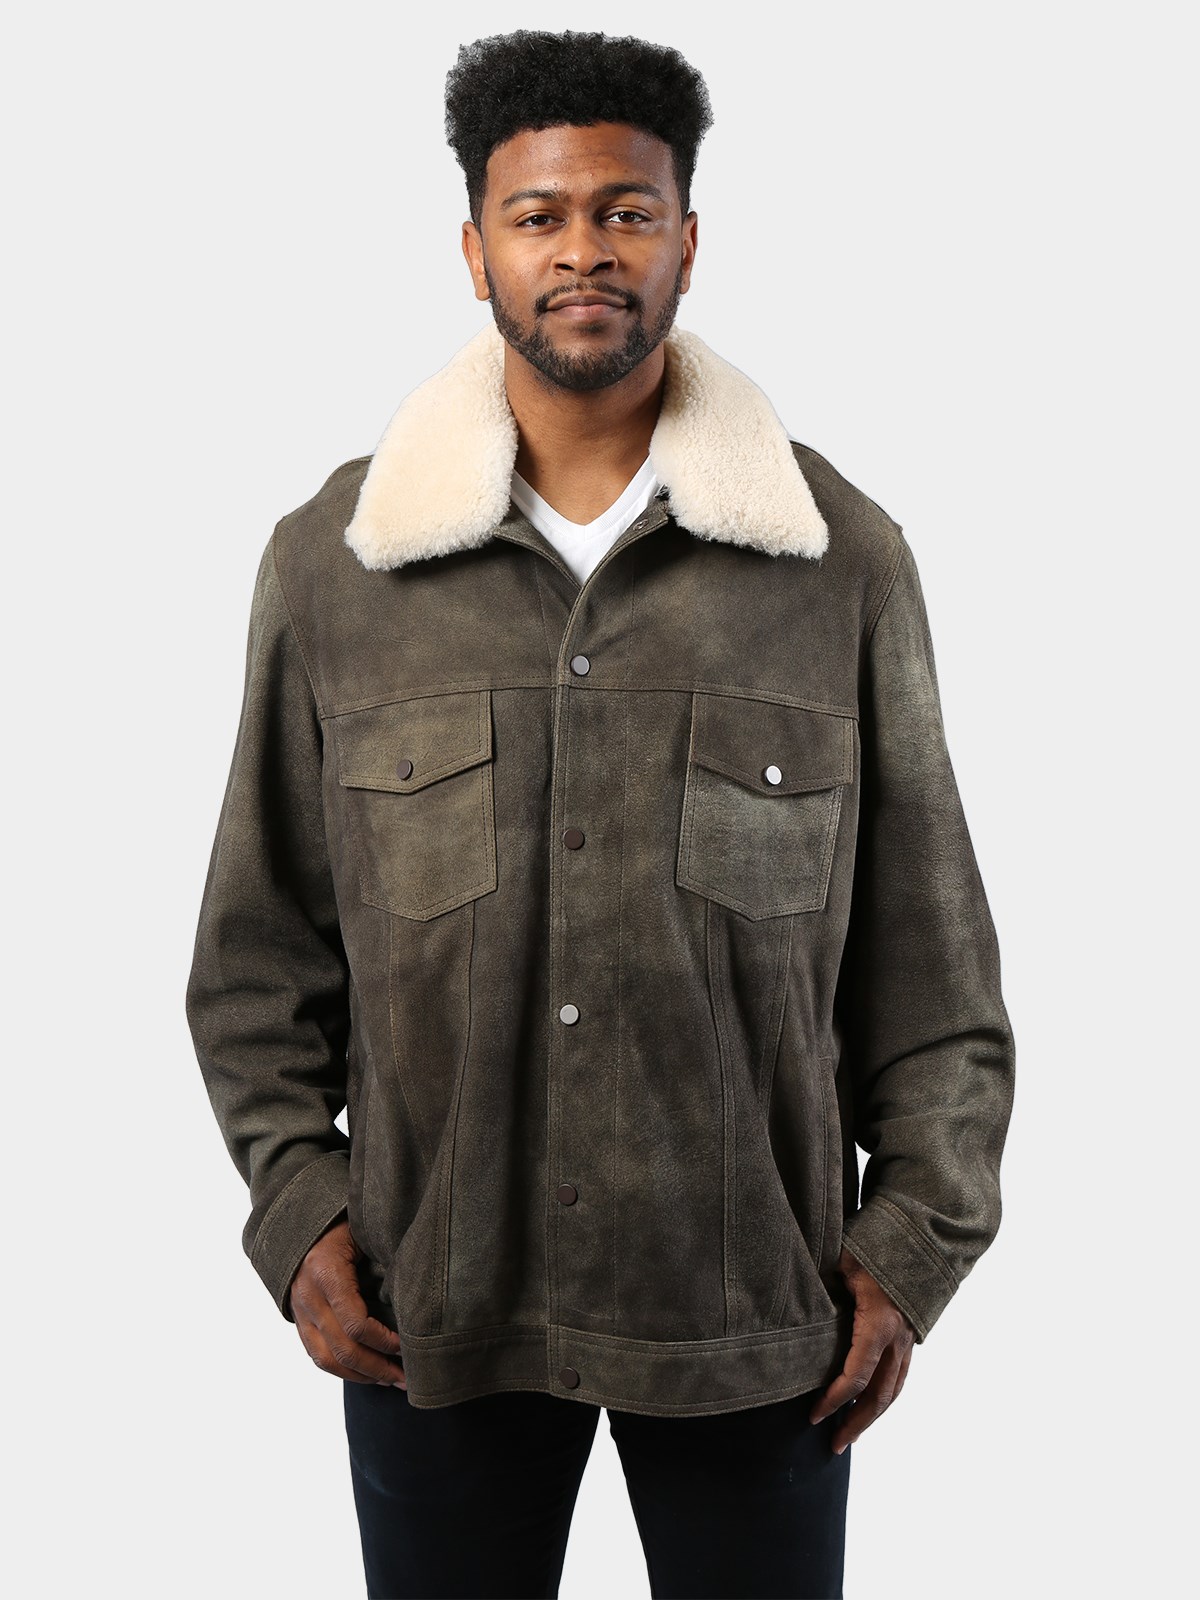 Man's Vintage Gray Suede Leather Jean Jacket with Detachable Shearling Collar